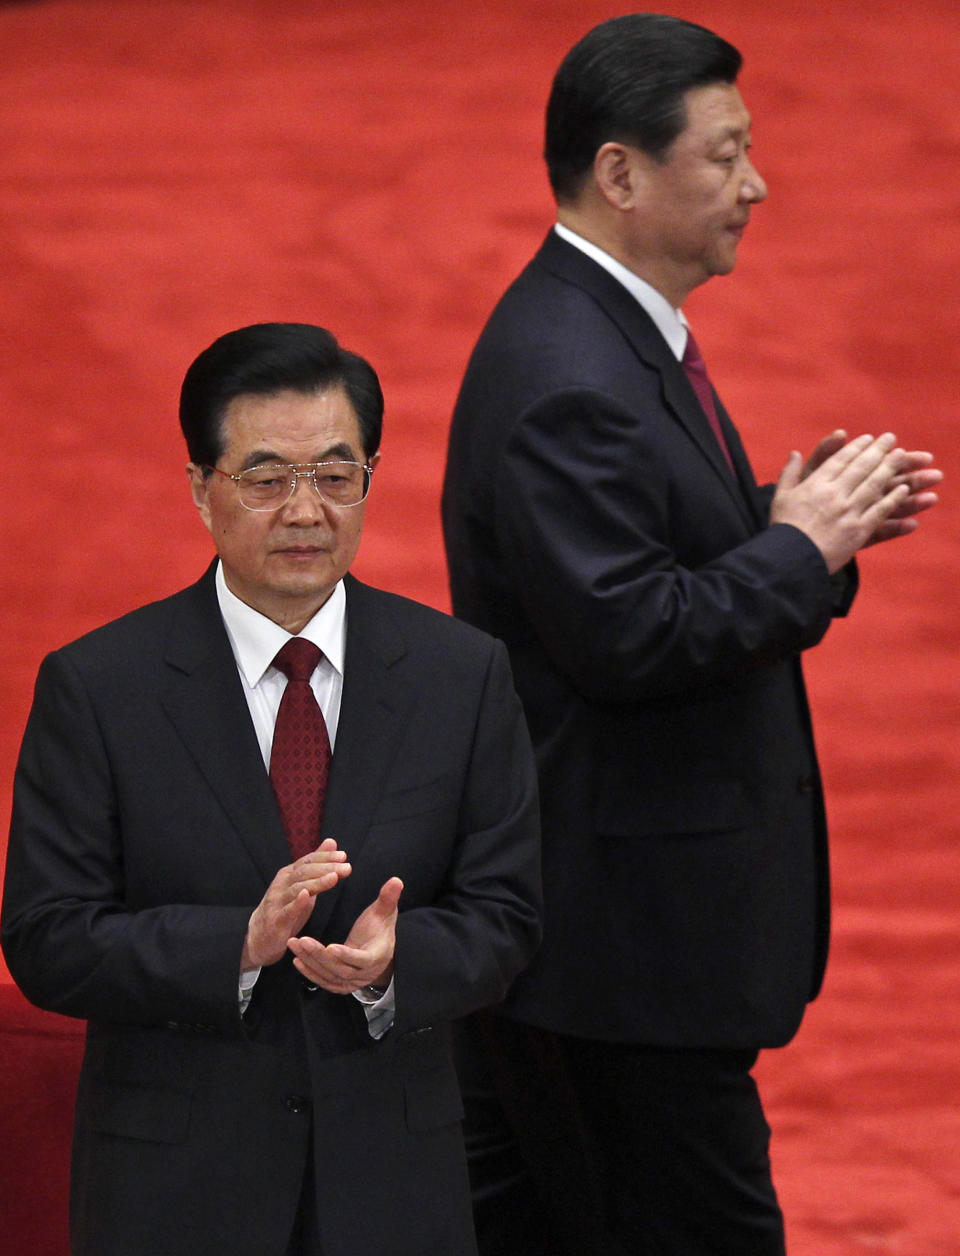 FILE - In this May 4, 2012 file photo, Chinese President Hu Jintao, front, and Vice President Xi Jinping, back, arrive at a conference to celebrate the 90th anniversary of the founding of Chinese Communist Youth League at the Great Hall of the People in Beijing, China. As Hu steps down as head of China’s Communist Party after 10 years in power, he’s hearing something unusual for a Chinese leader: sharp criticism. (AP Photo/Alexander F. Yuan, File)